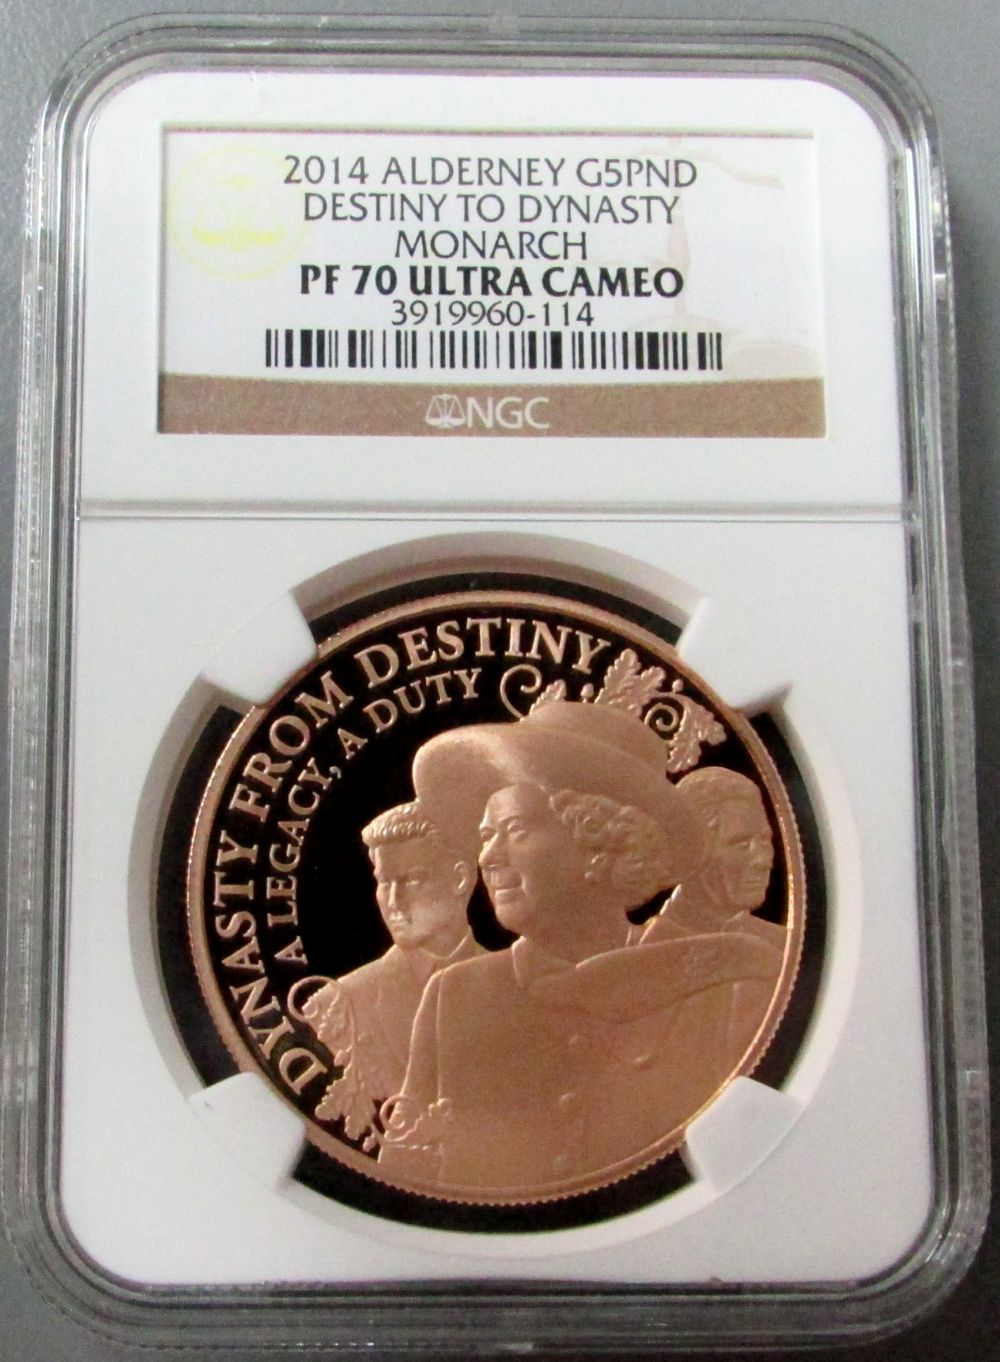 2014 GOLD ALDERNEY 5 POUND DESTINY TO DYNASTY MONARCH COIN NGC PERFECT PROOF 70 ULTRA CAMEO ONLY 63 MINTED